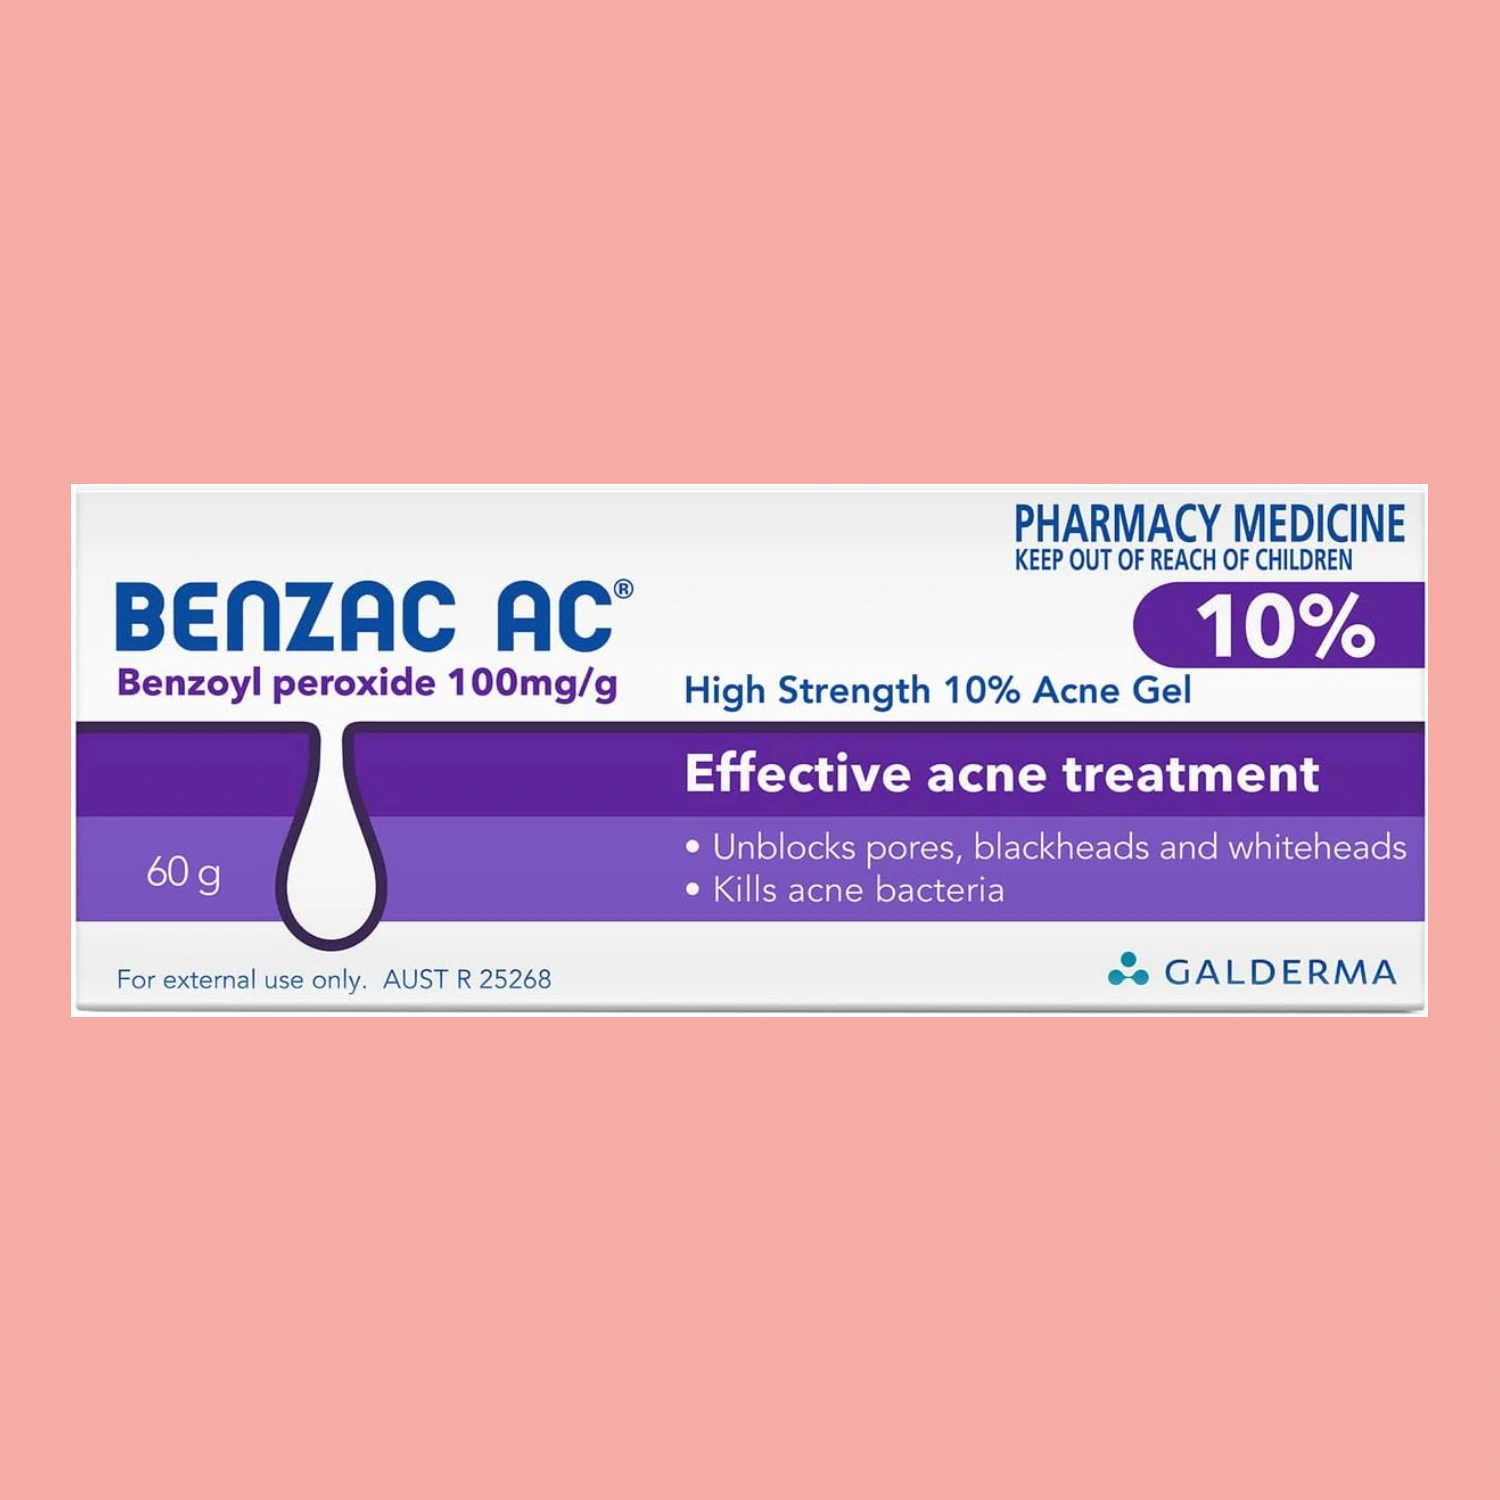 A box of Benzac AC Gel positioned on a pink background